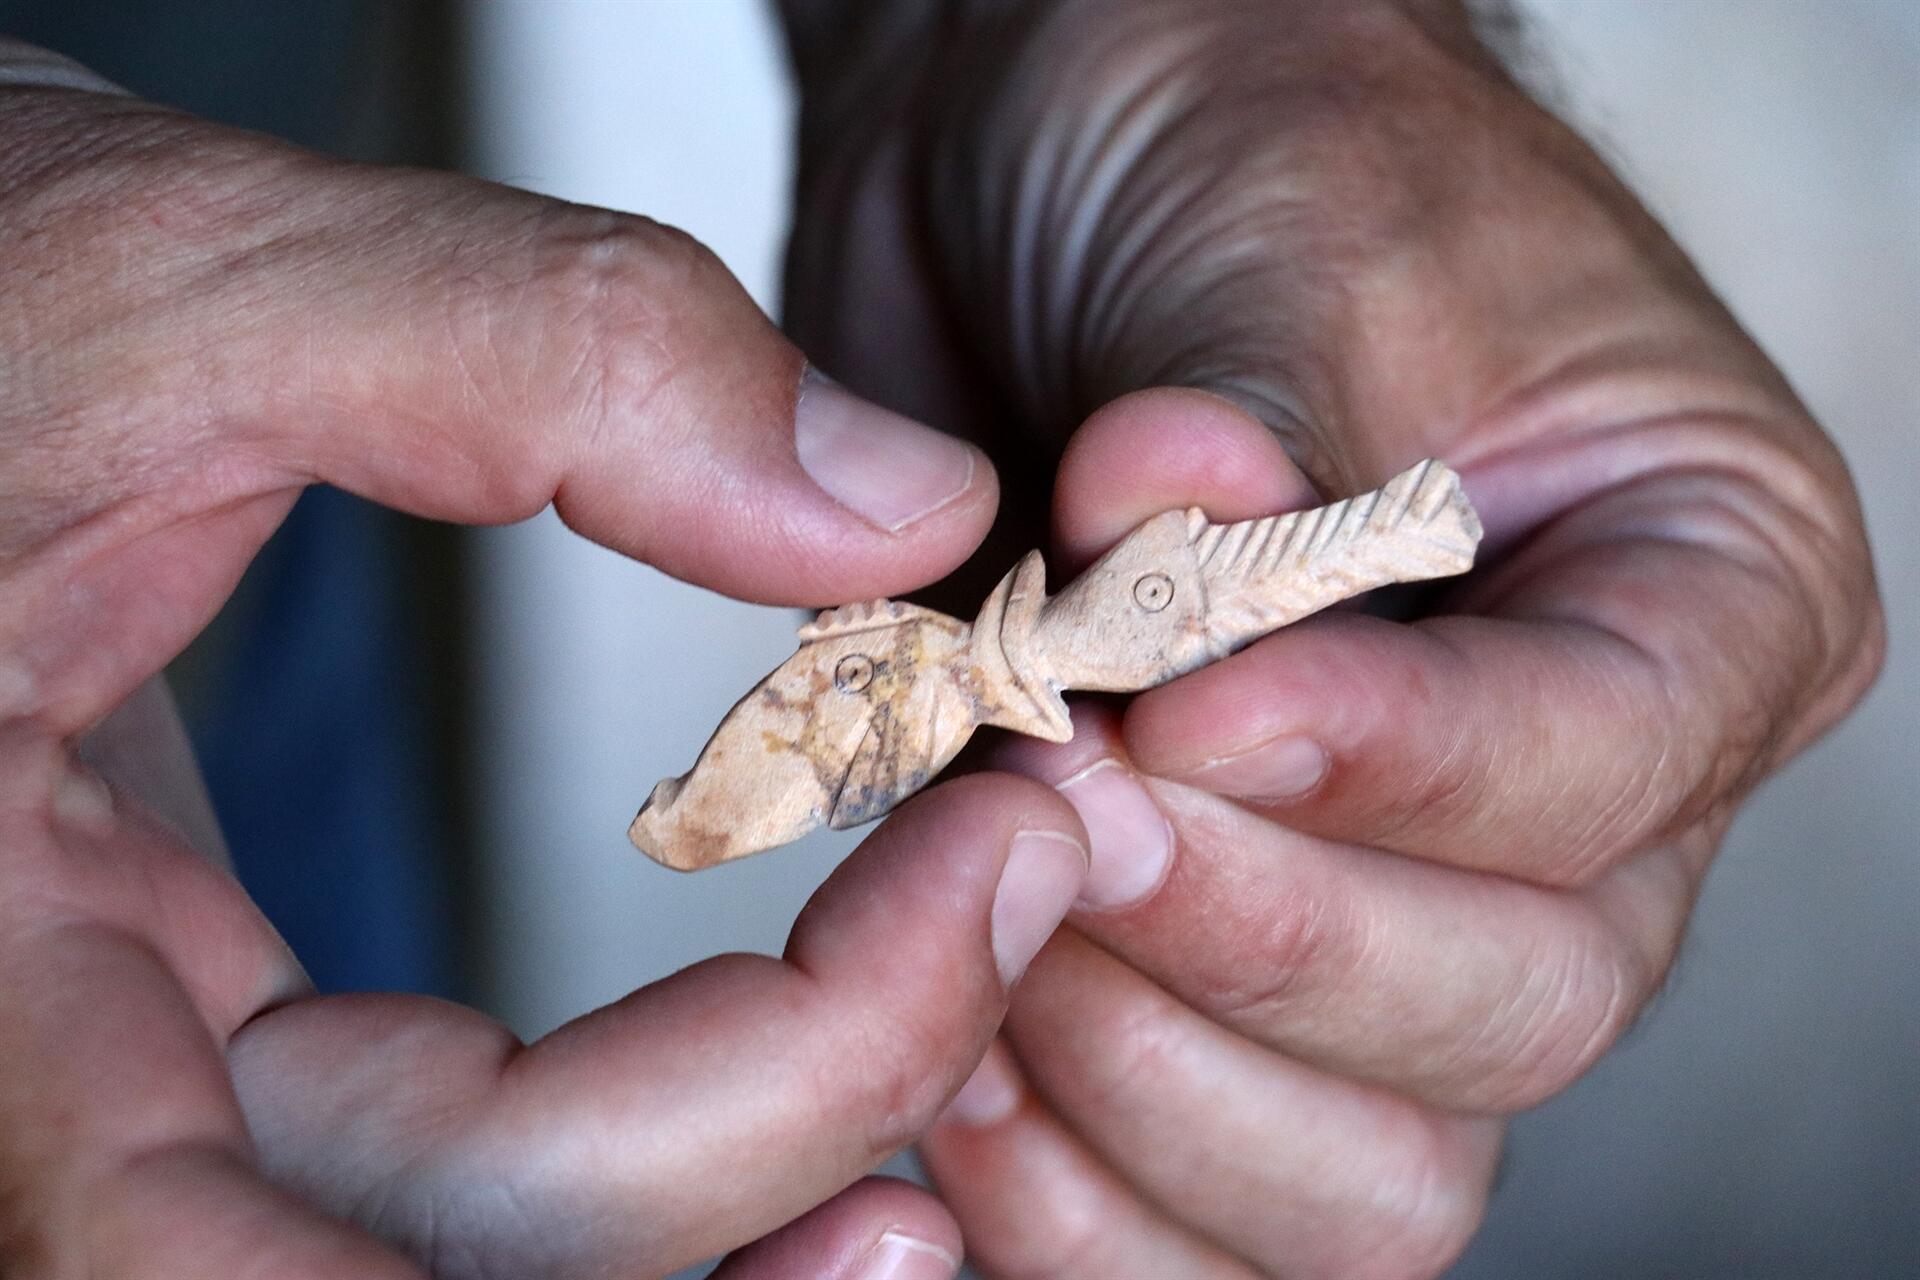 Some 2,500-year-old objects made from goat bones unearthed in Turkey’s west